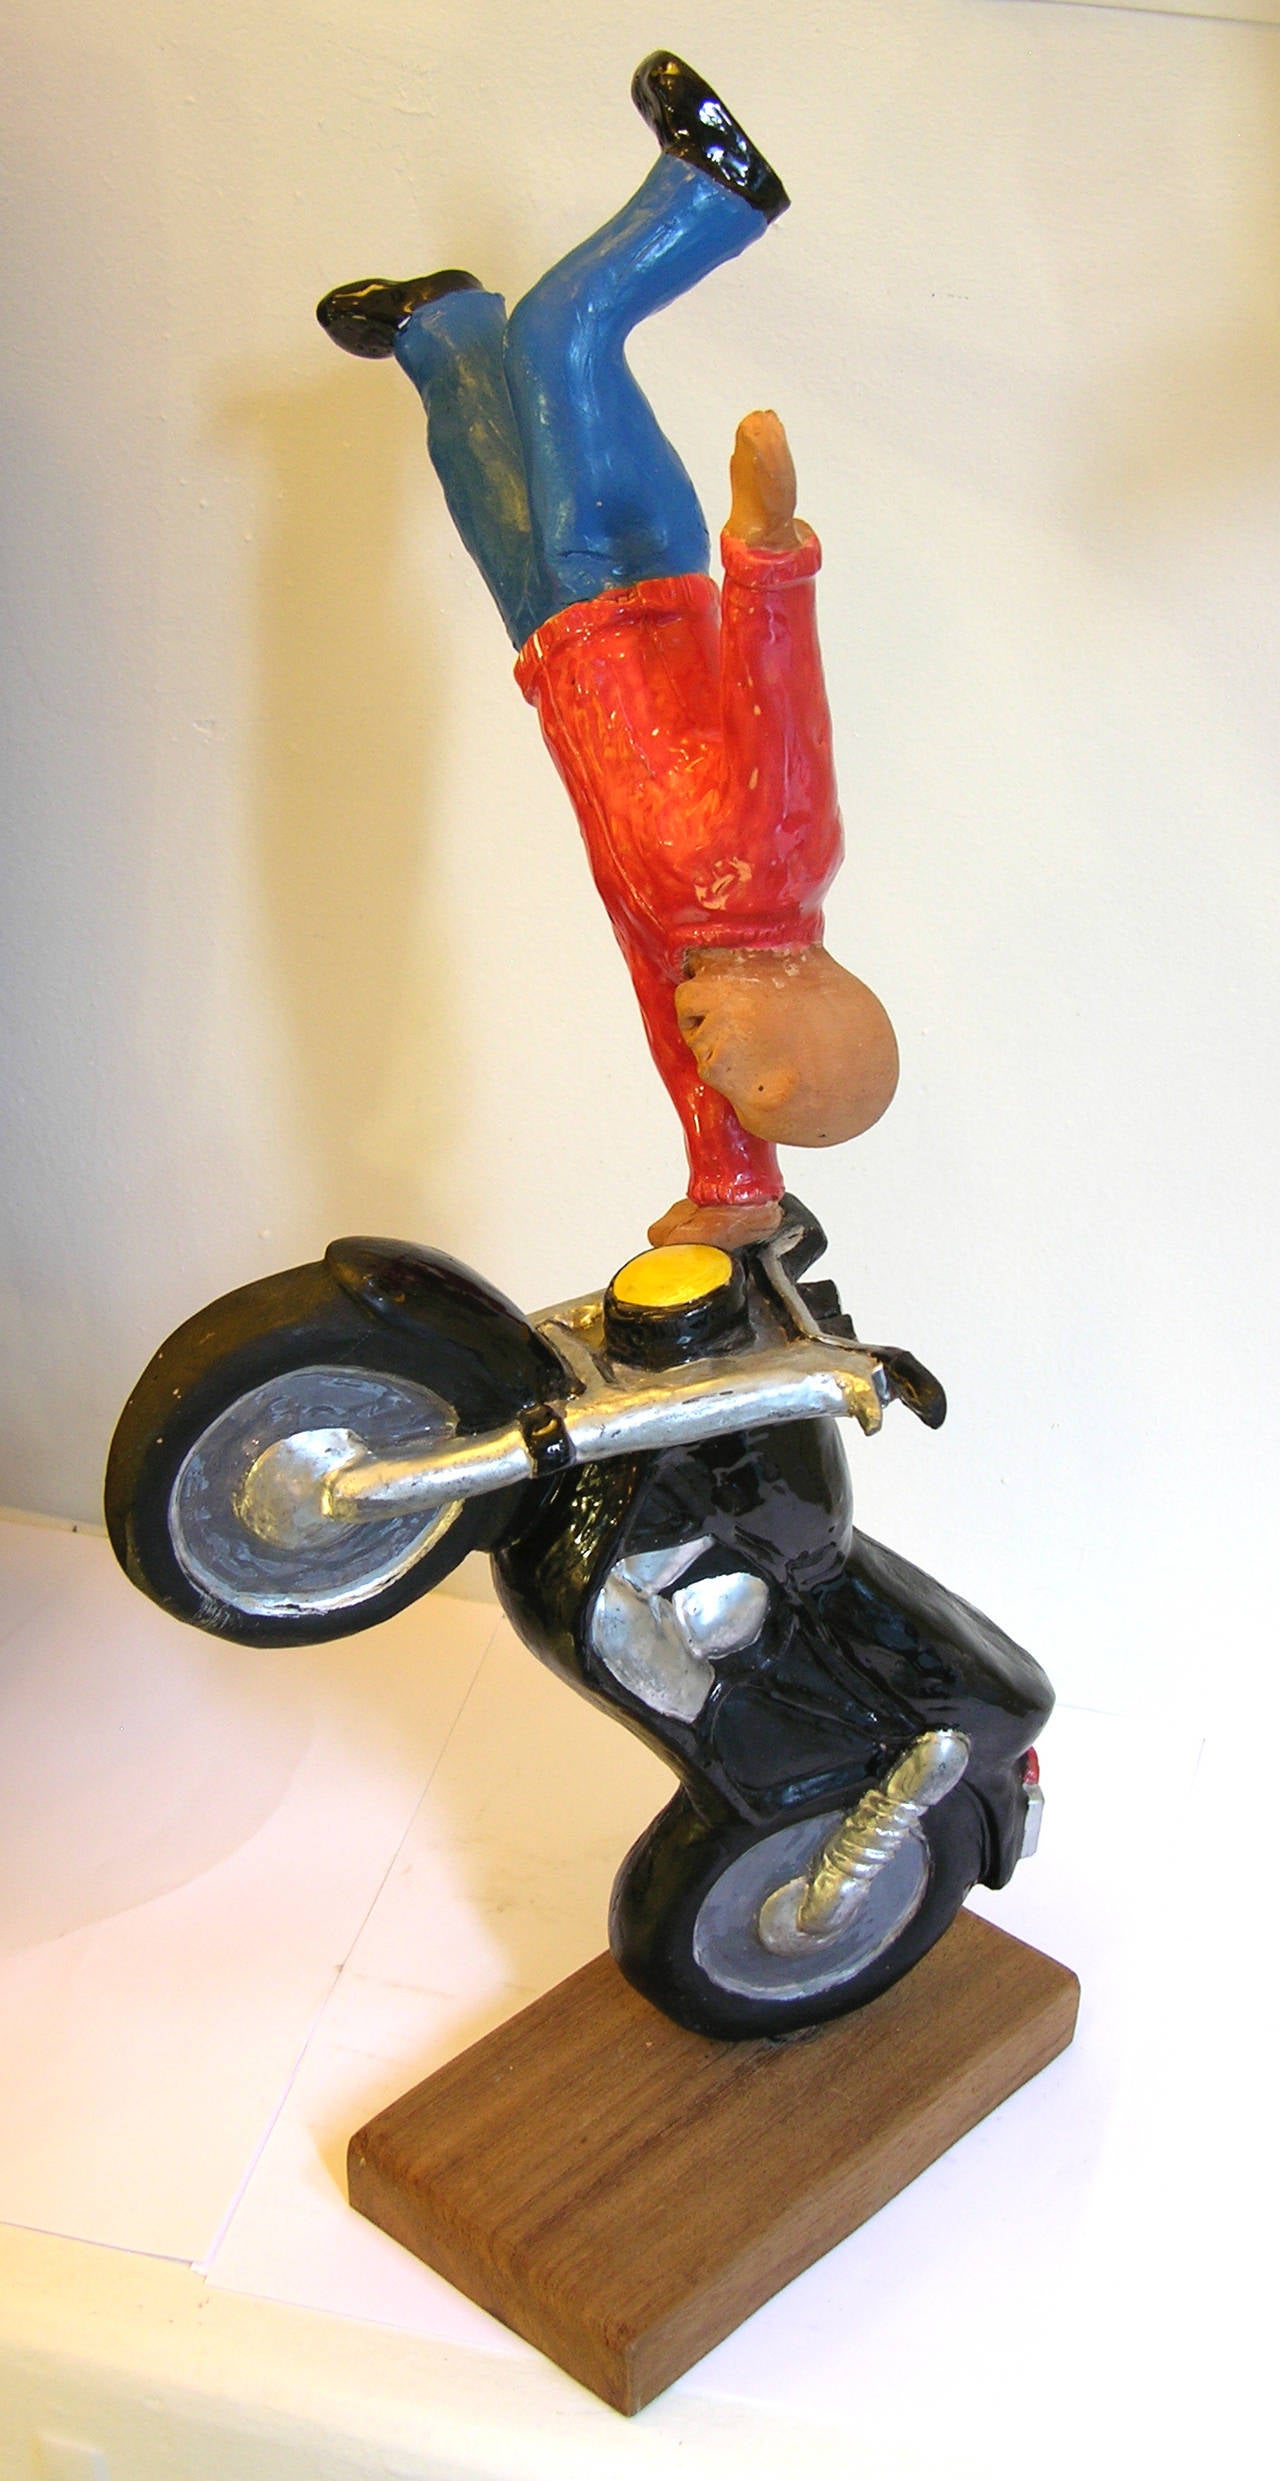 Handmade in terra cotta, this acrobat is performing a one hand stand on top of a motorcycle. This sculpture is hand-painted and fire enameled to enhance the detailed and precise design skillfully handcrafted. 
The sculpture is a very limited signed